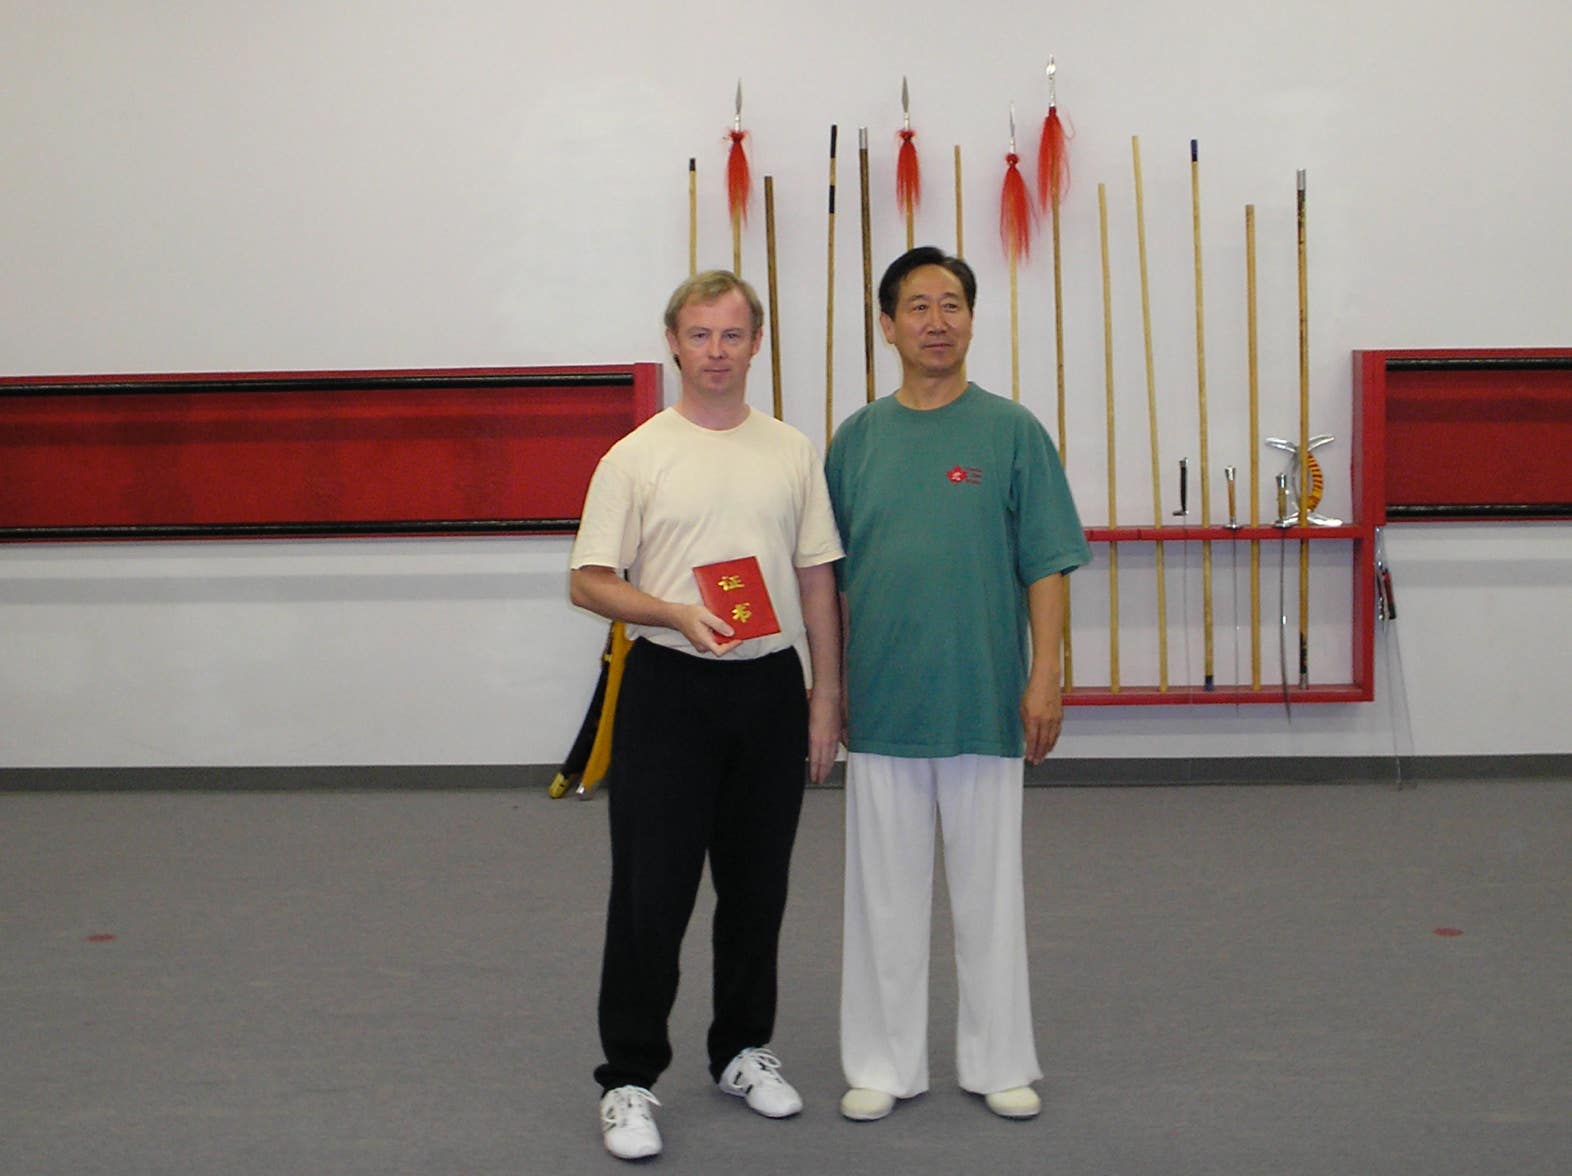 Stephen Forde stnding next to Master Di Guoyong